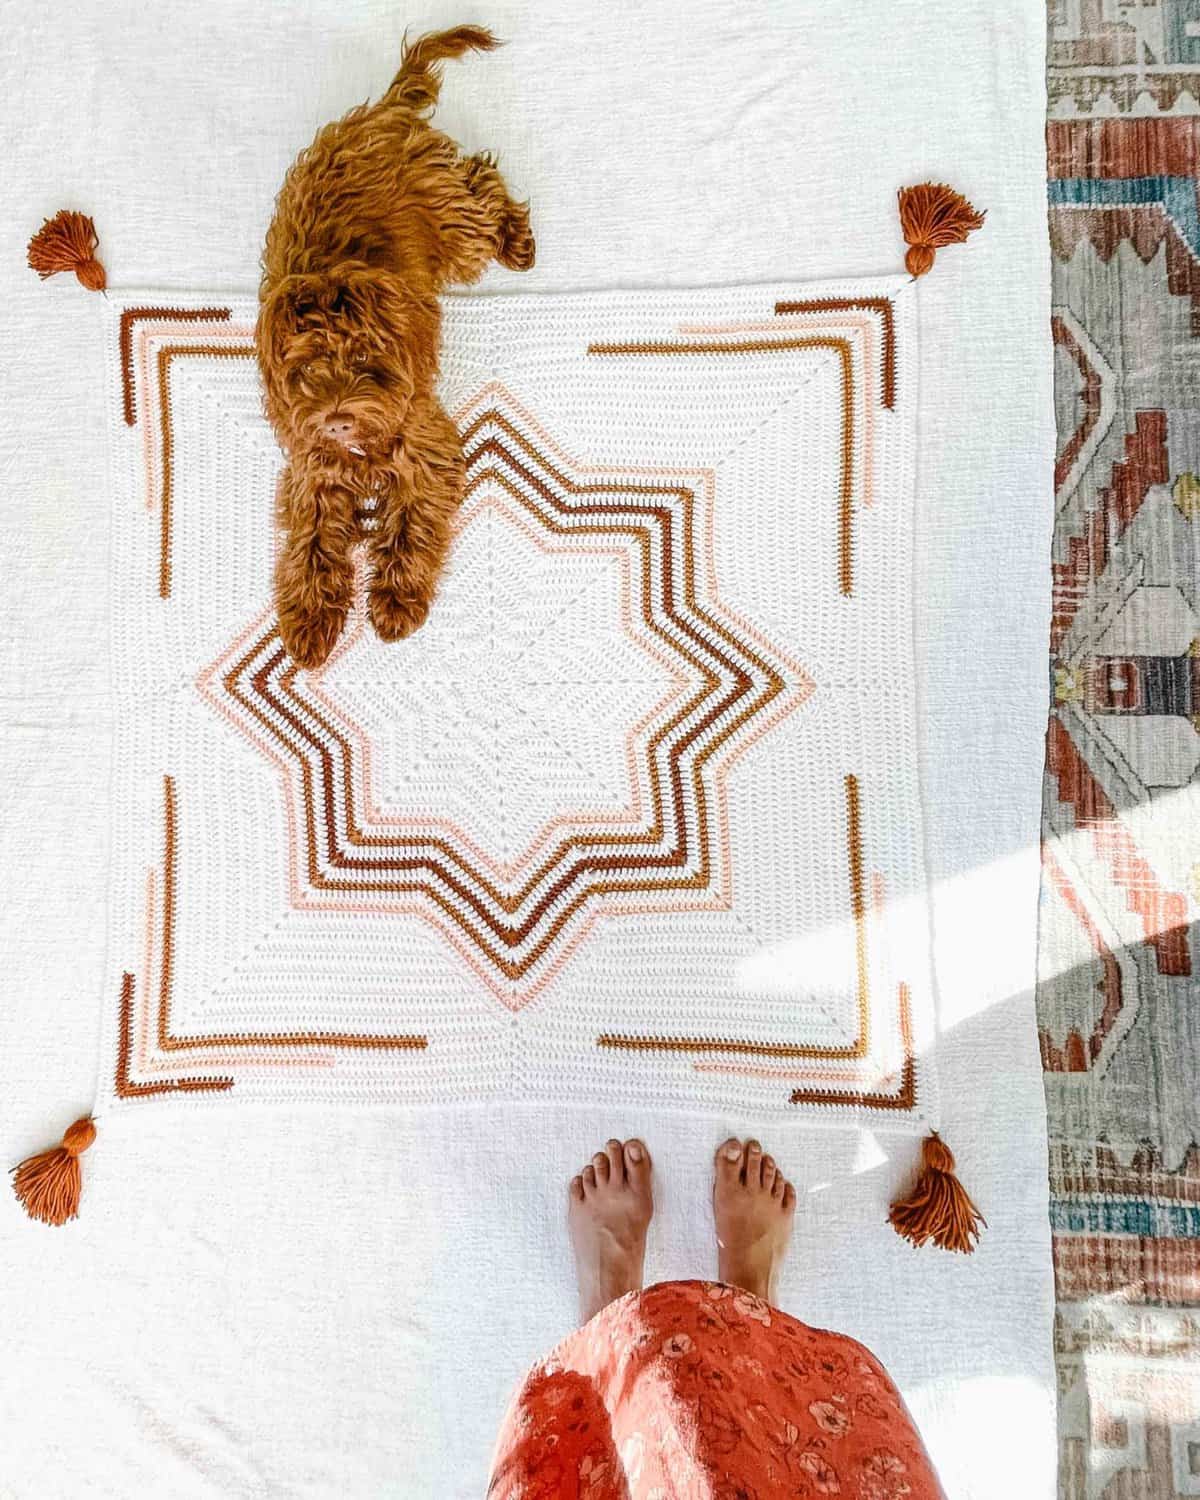 This image shows a colorful 8 point star crochet blanket. There is a brown fluffy dog laying on the blanket and a woman's pair of feet standing on the blanket. 